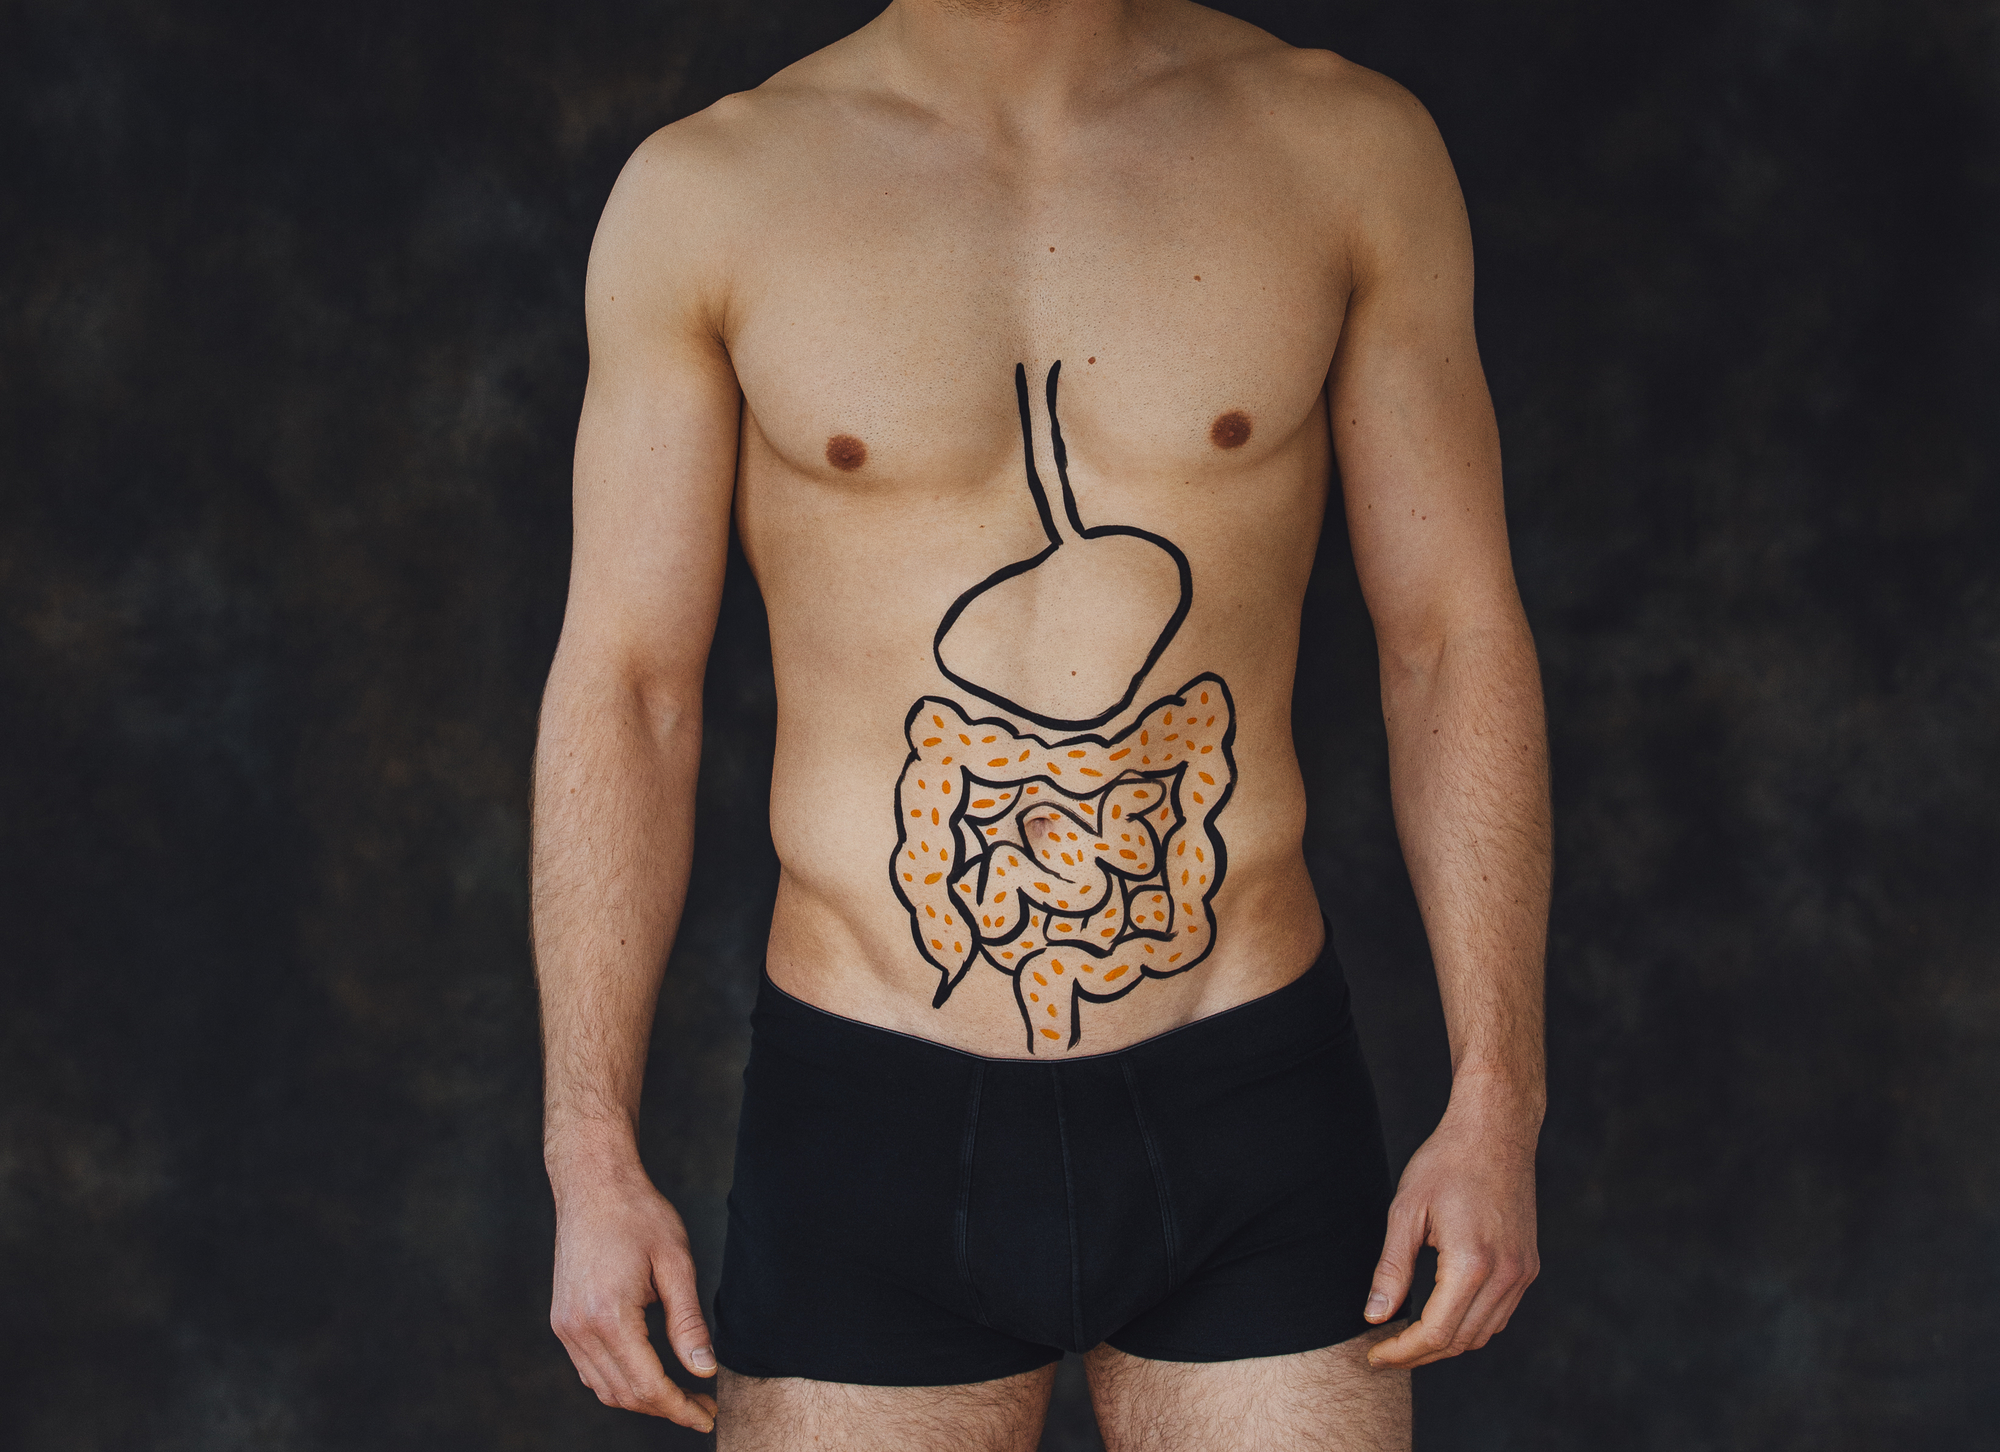 Digestive tract torso - Is Leaky Gut Real?